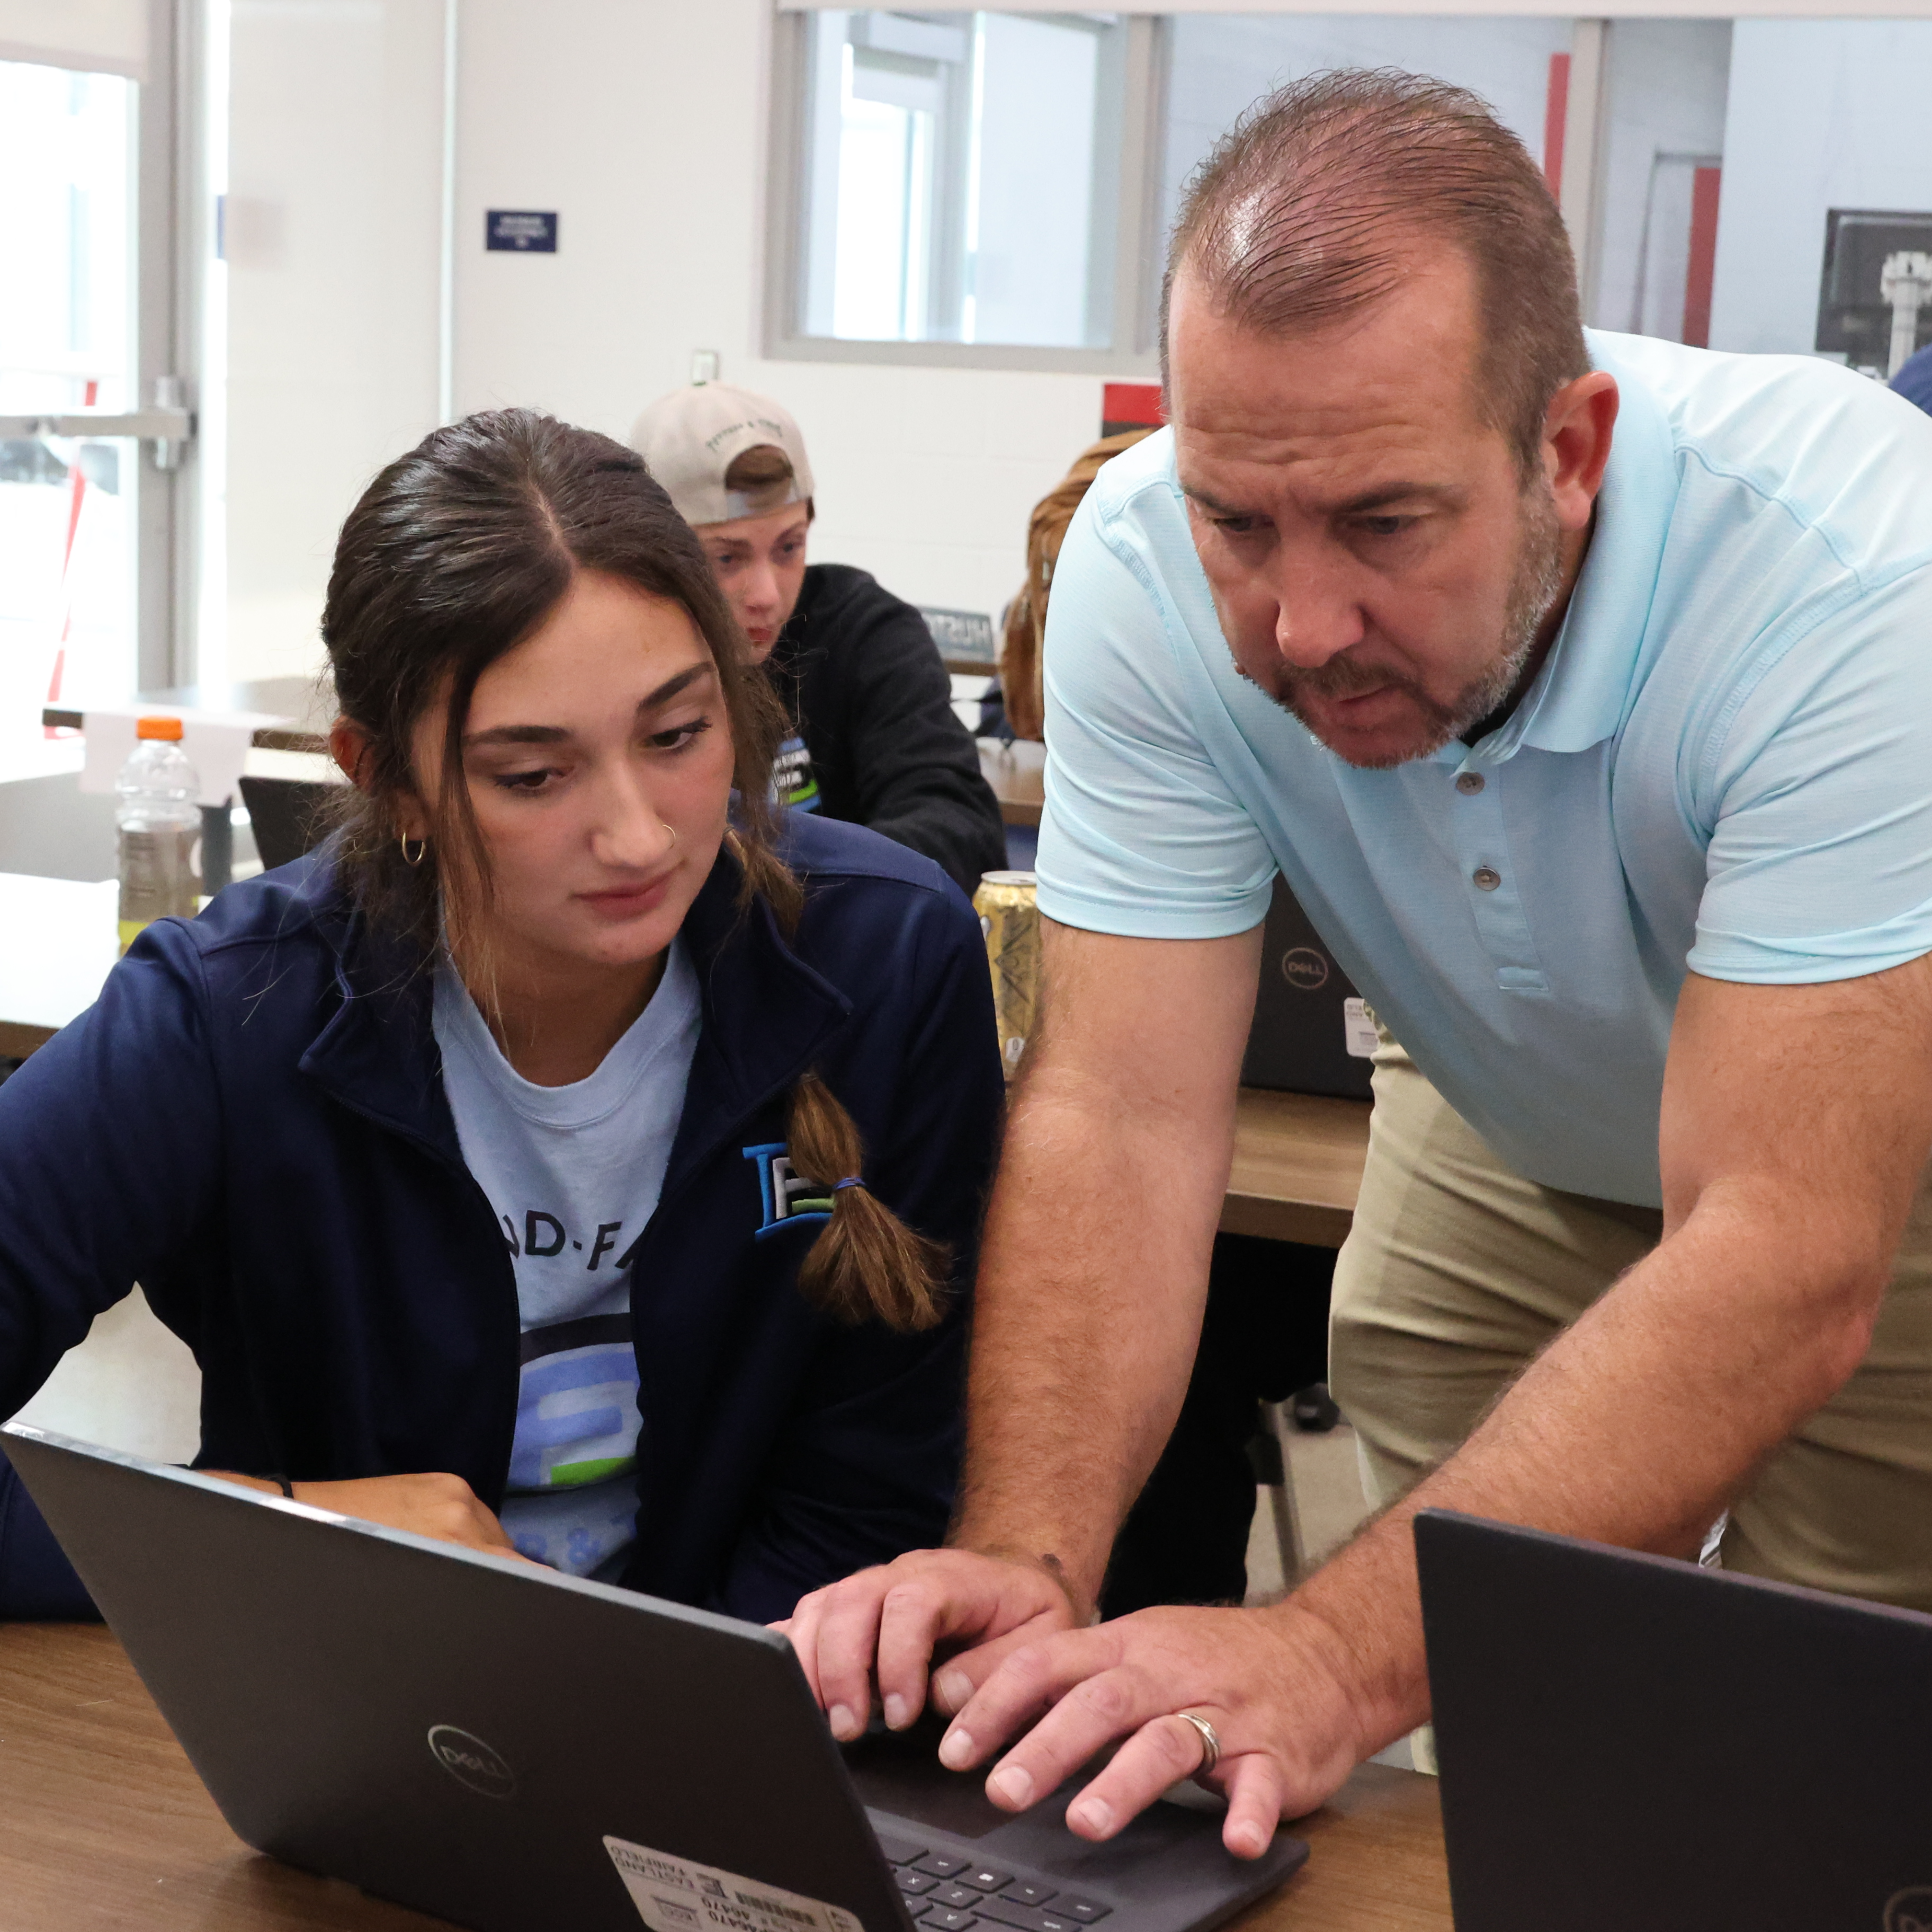 An instructor navigates a Chromebook with a female student